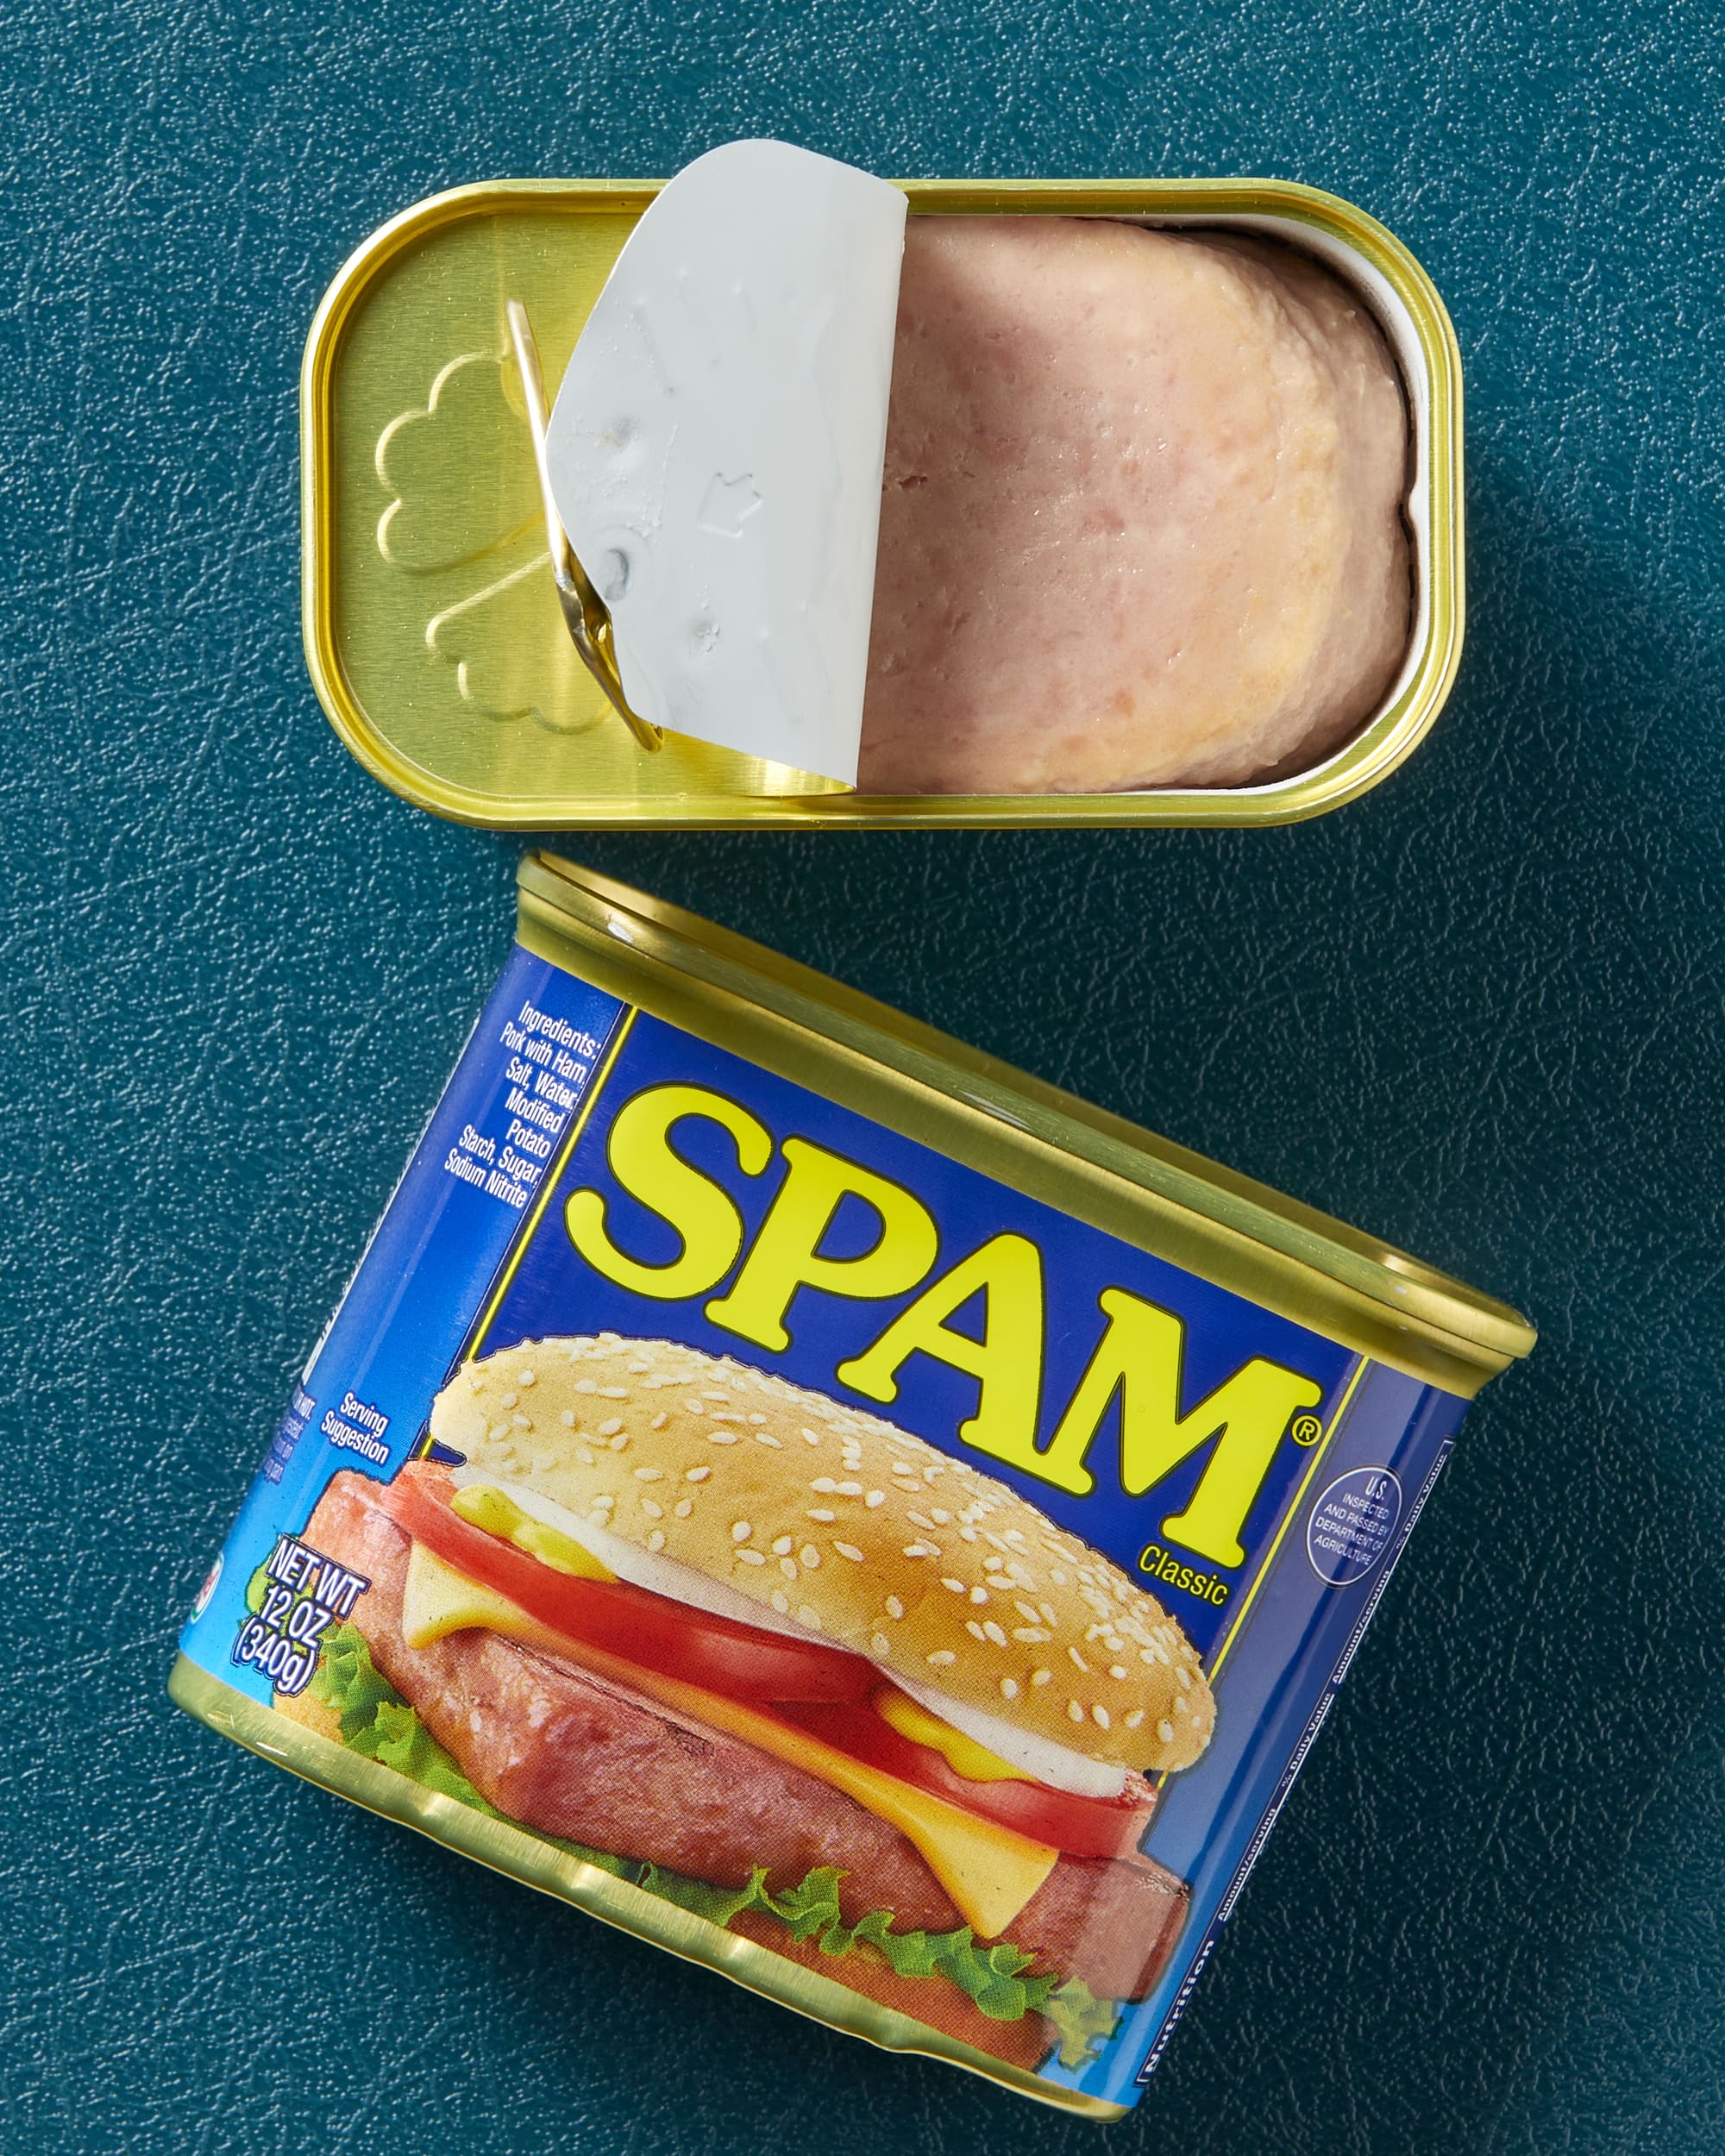 https://cdn.apartmenttherapy.info/image/upload/v1696622244/k/Photo/Series/2023-10-what-is-spam-made-of/what-is-spam-made-of-018.jpg